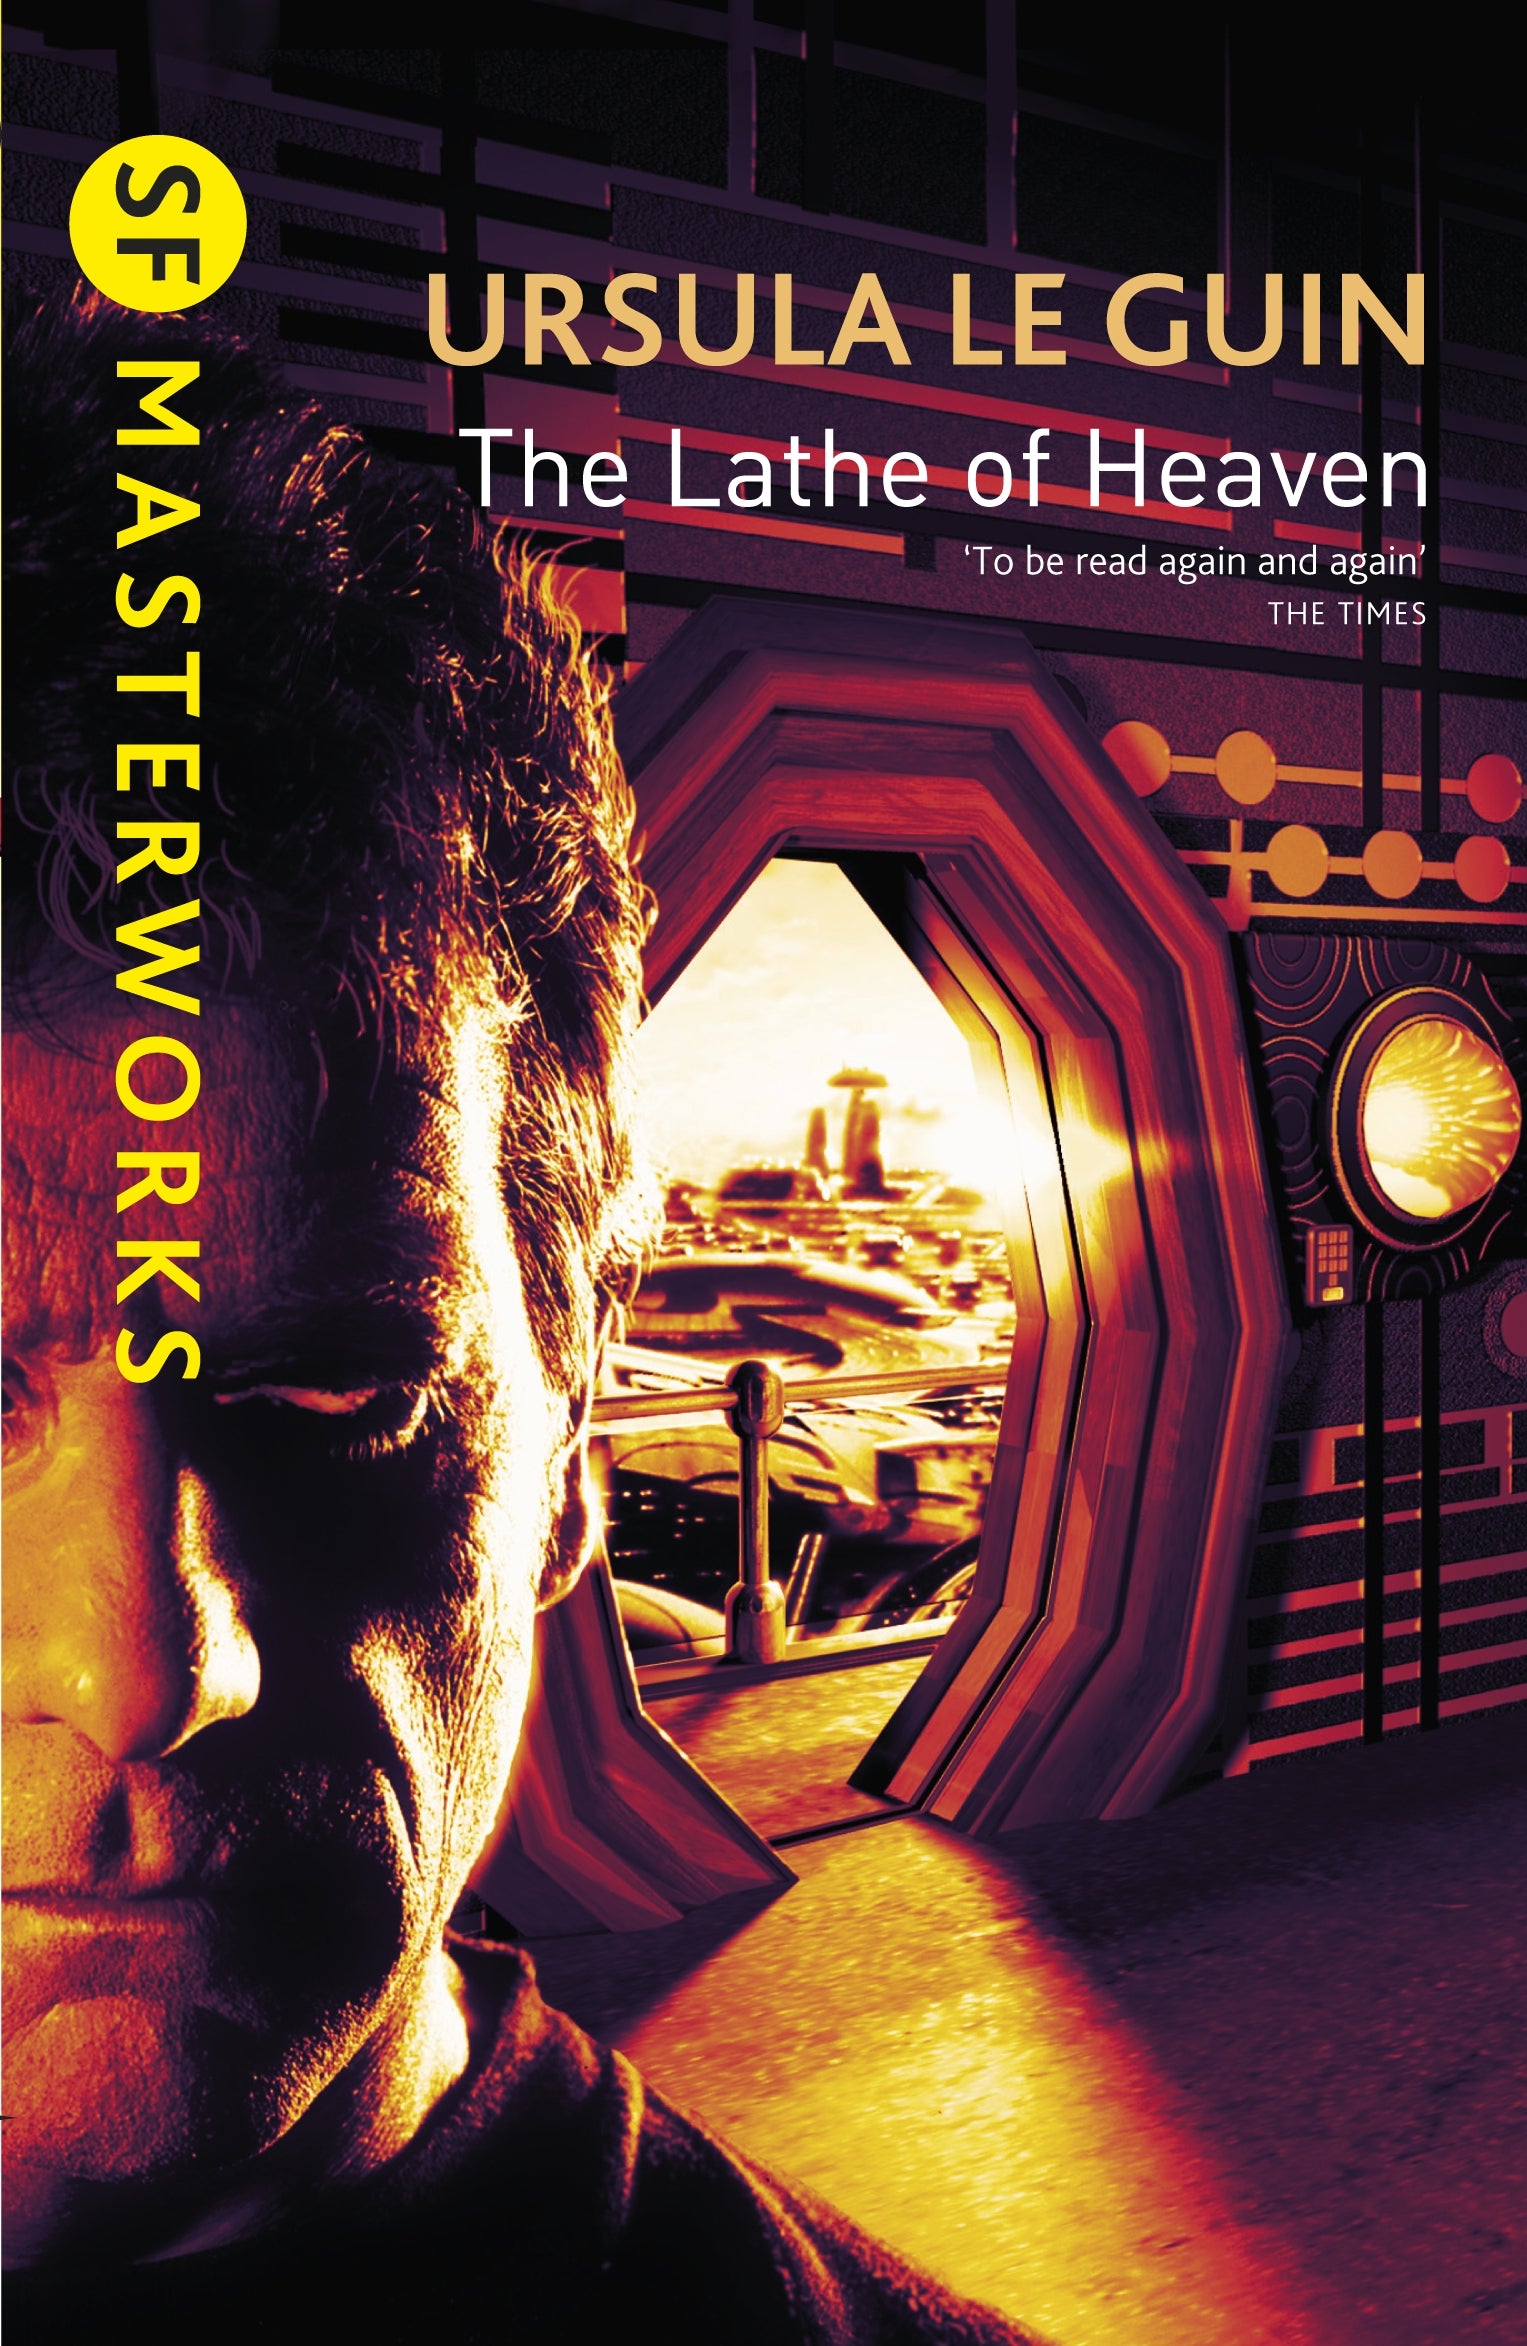 The Lathe Of Heaven by Ursula K. Le Guin